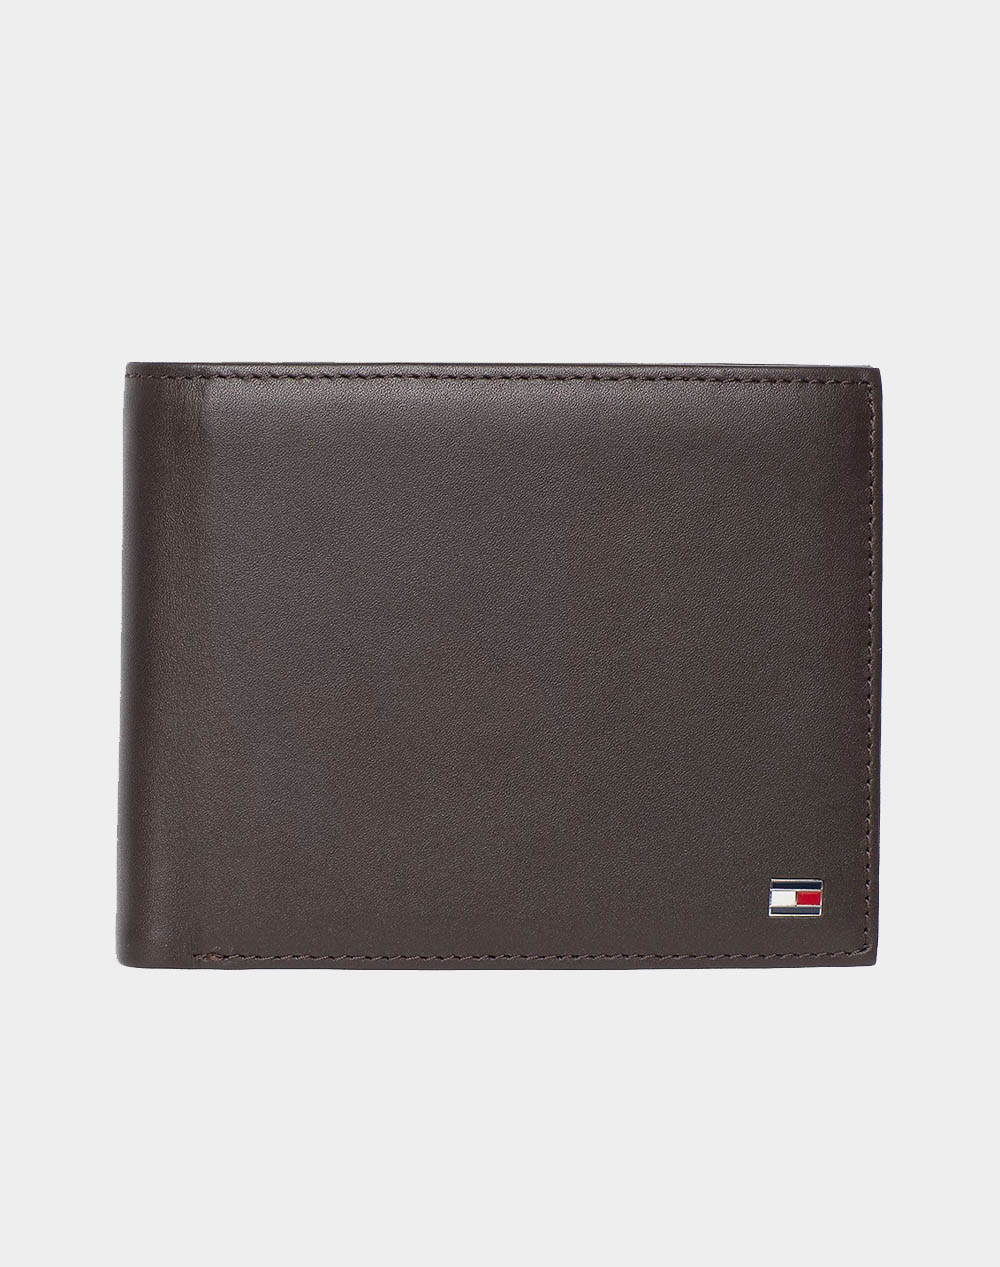 TOMMY HILFIGER ETON CC AND COIN POCKET AM0AM00651-041 Brown